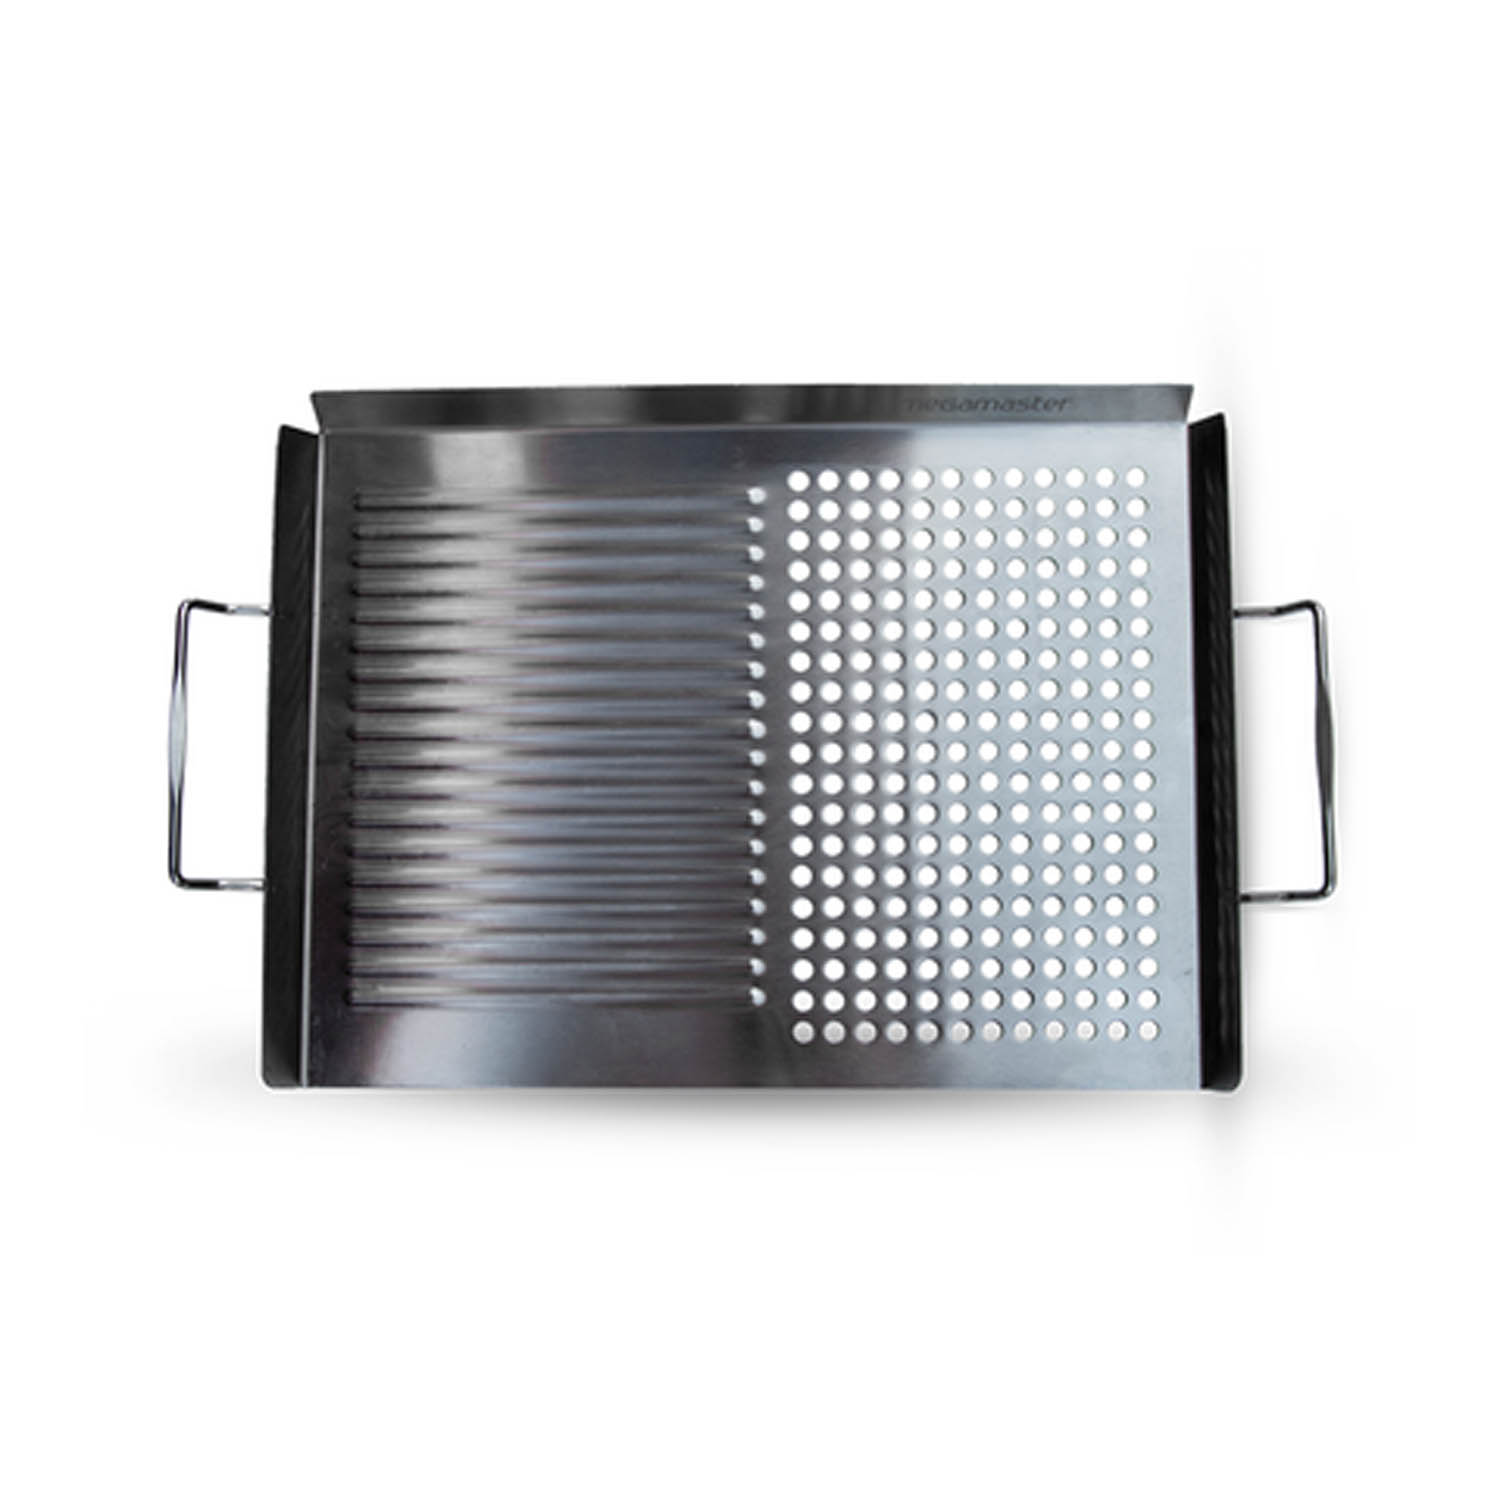 Megamaster Stainless Steel Grill Pan